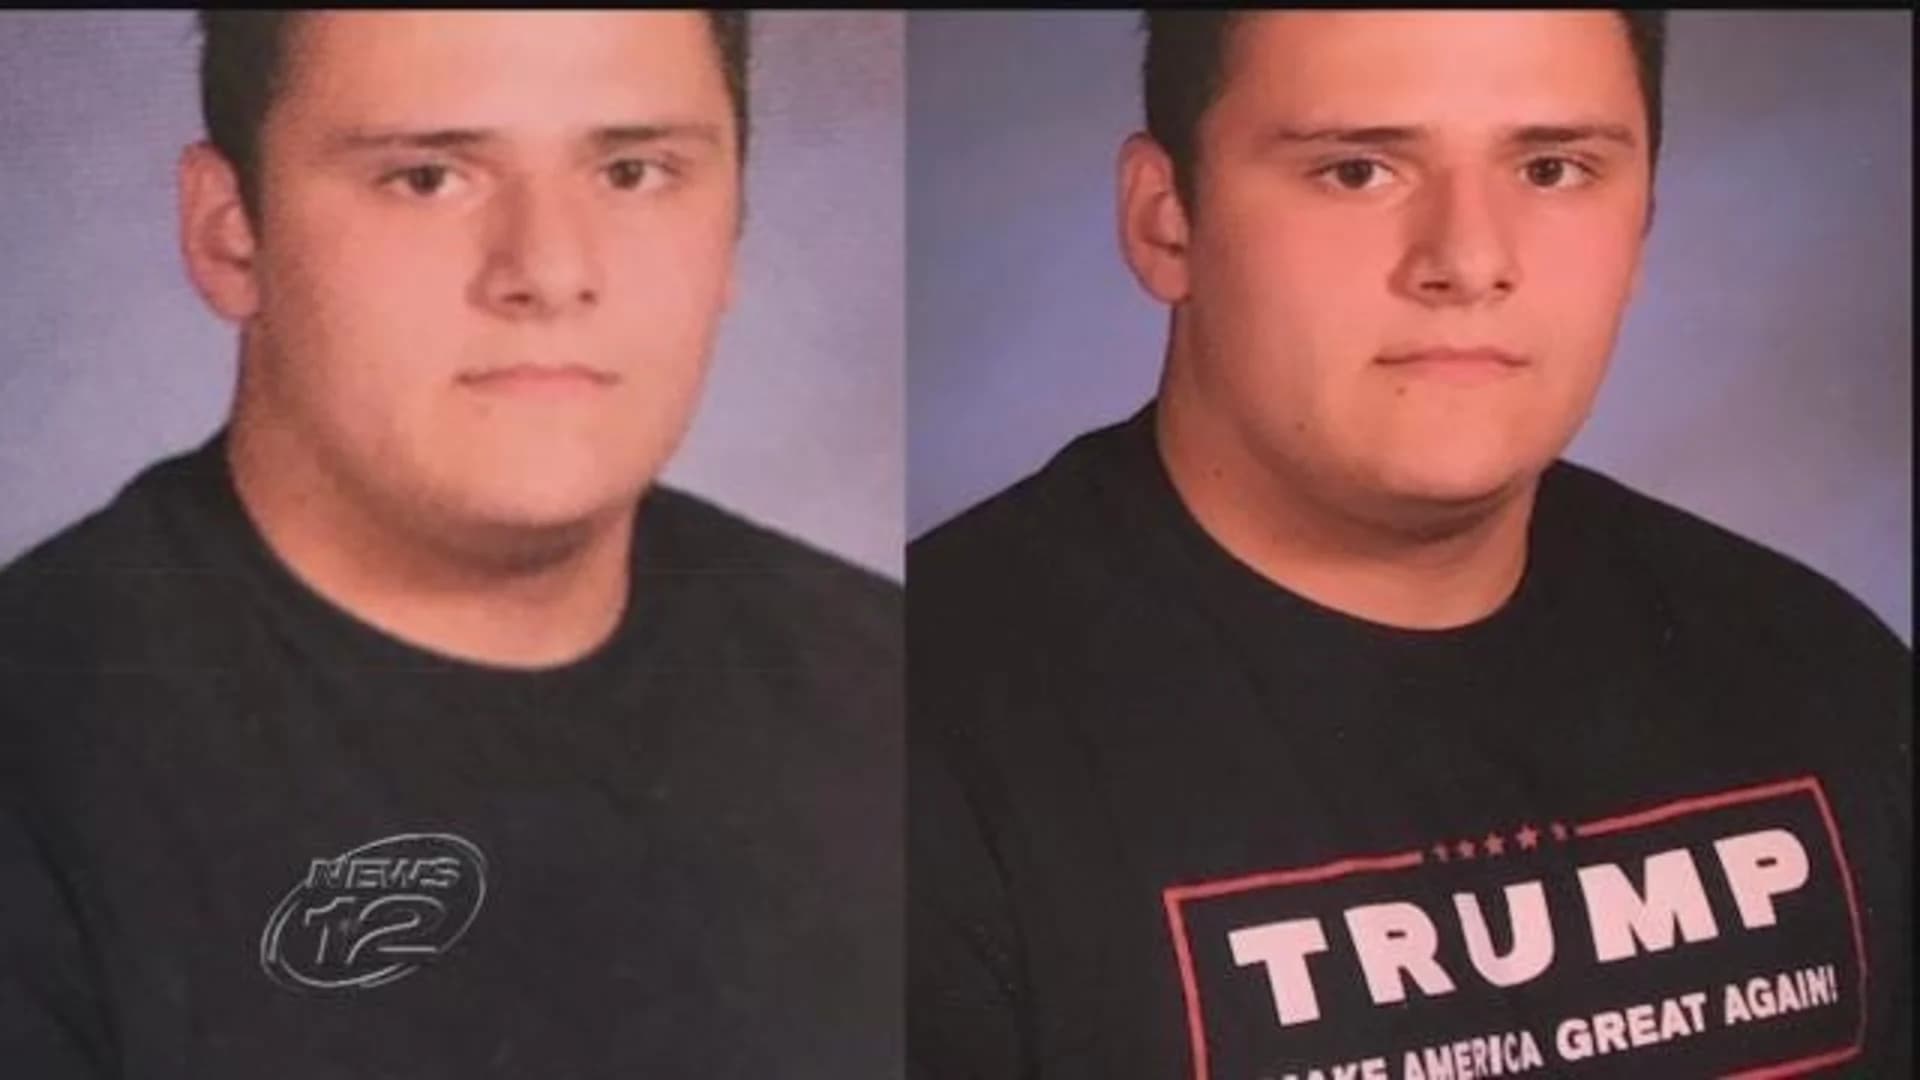 Teacher suspended after pro-Trump yearbook photos are altered